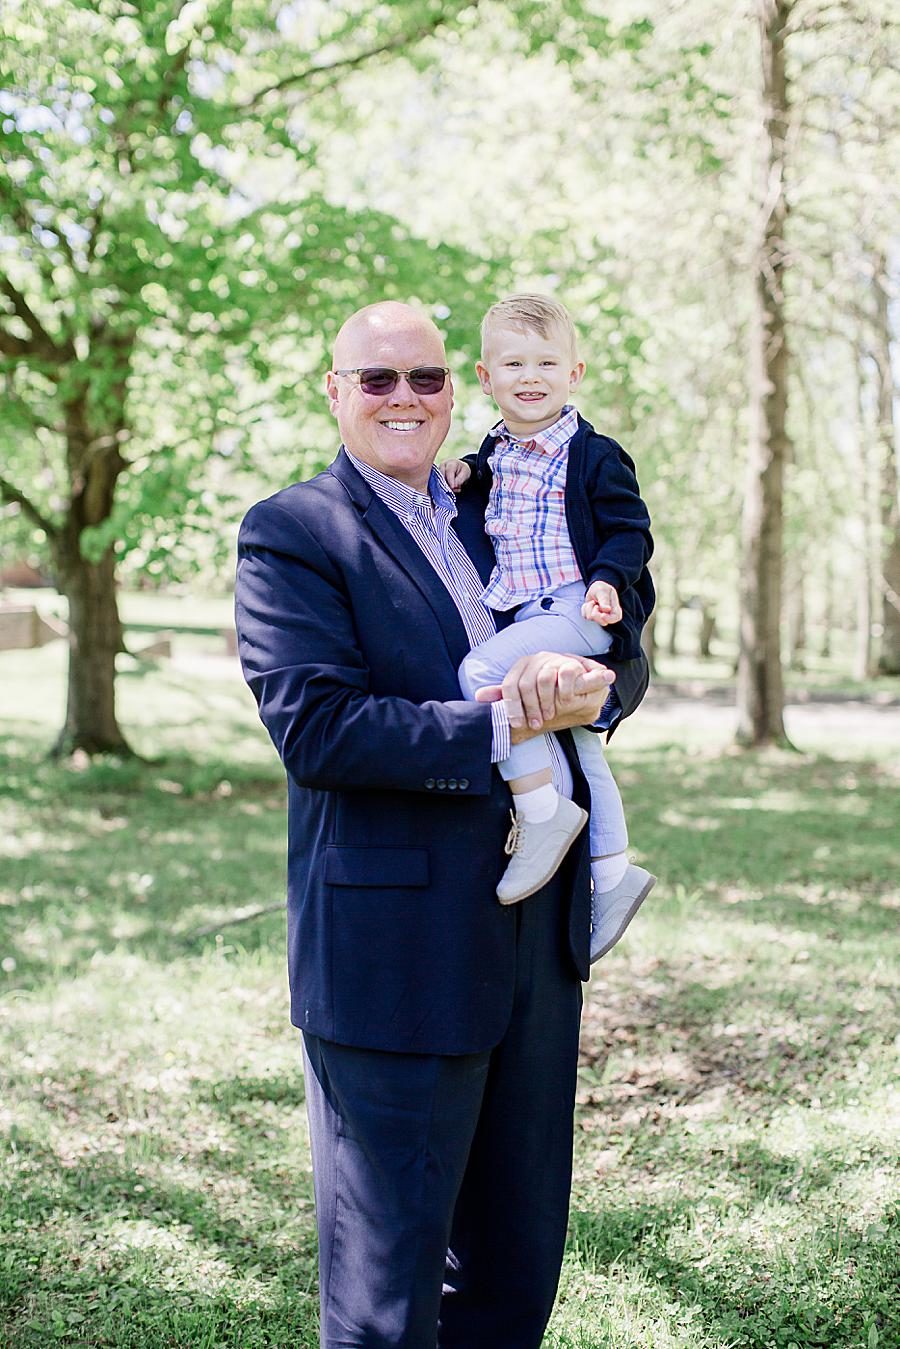 Aviators at this Easter 2019 by Knoxville Wedding Photographer, Amanda May Photos.